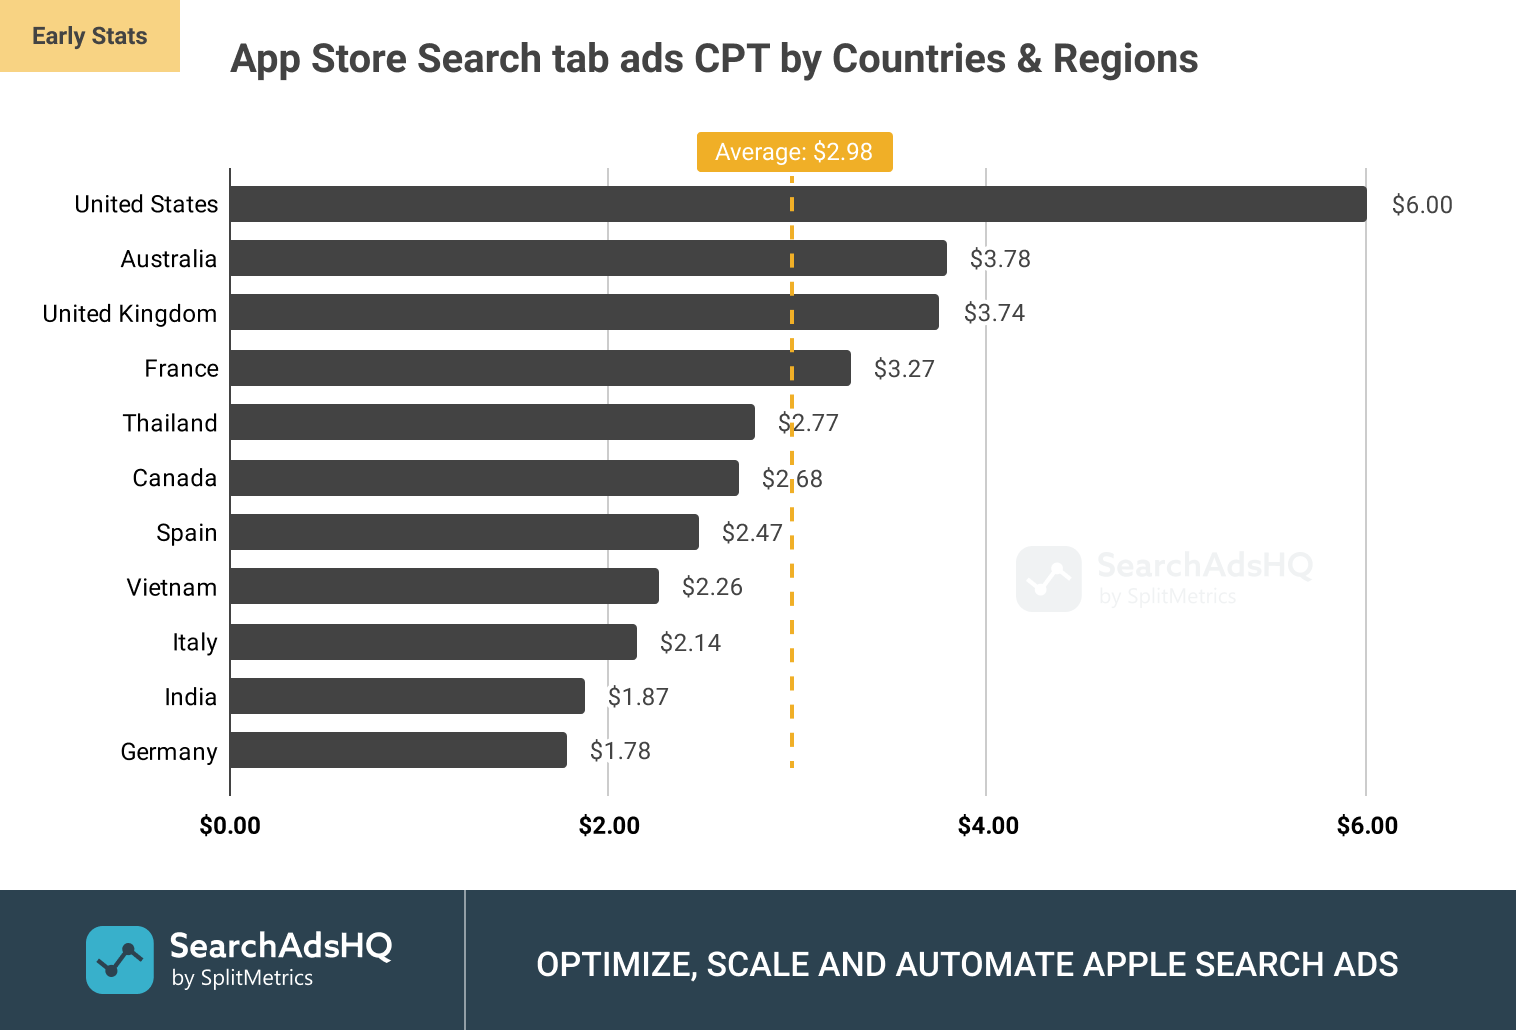 App Store Search tab ads: Average CPT (Cost per Tap) by Countries and Regions